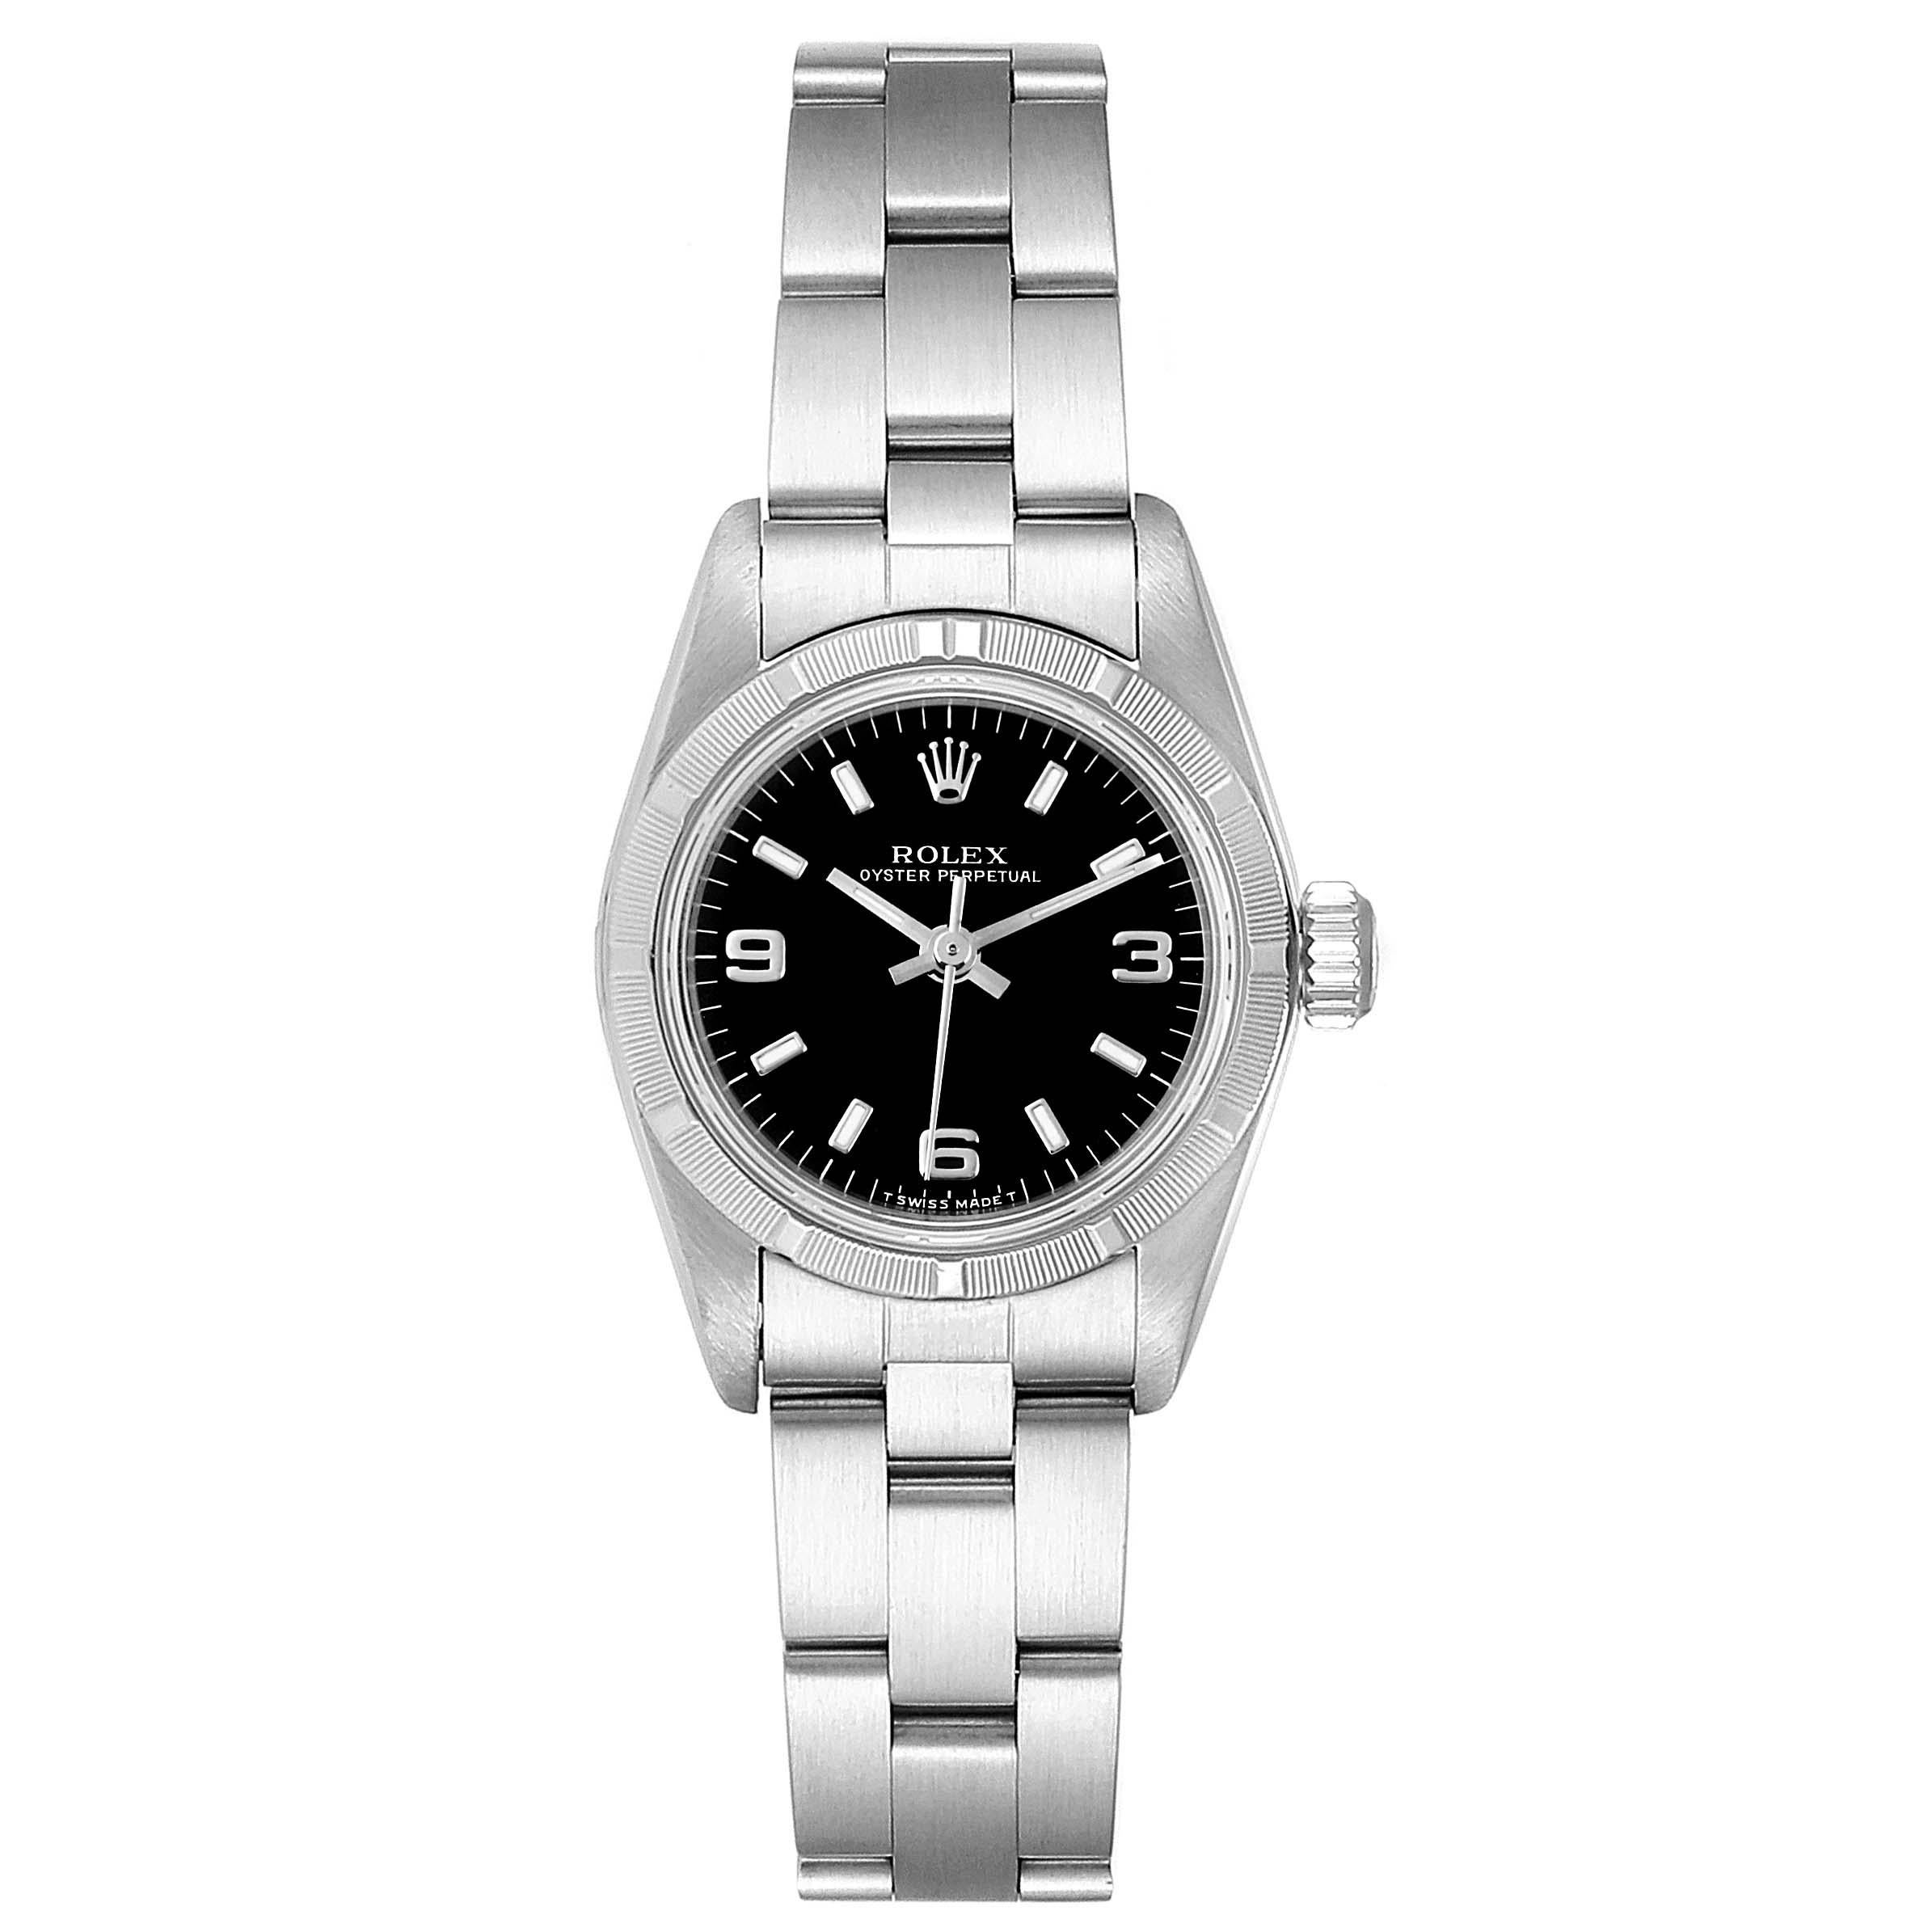 Rolex Oyster Perpetual Black Dial Oyster Bracelet Ladies Watch 67230. Officially certified chronometer self-winding movement. Stainless steel oyster case 24.0 mm in diameter. Rolex logo on a crown. Stainless steel engine turned bezel. Scratch